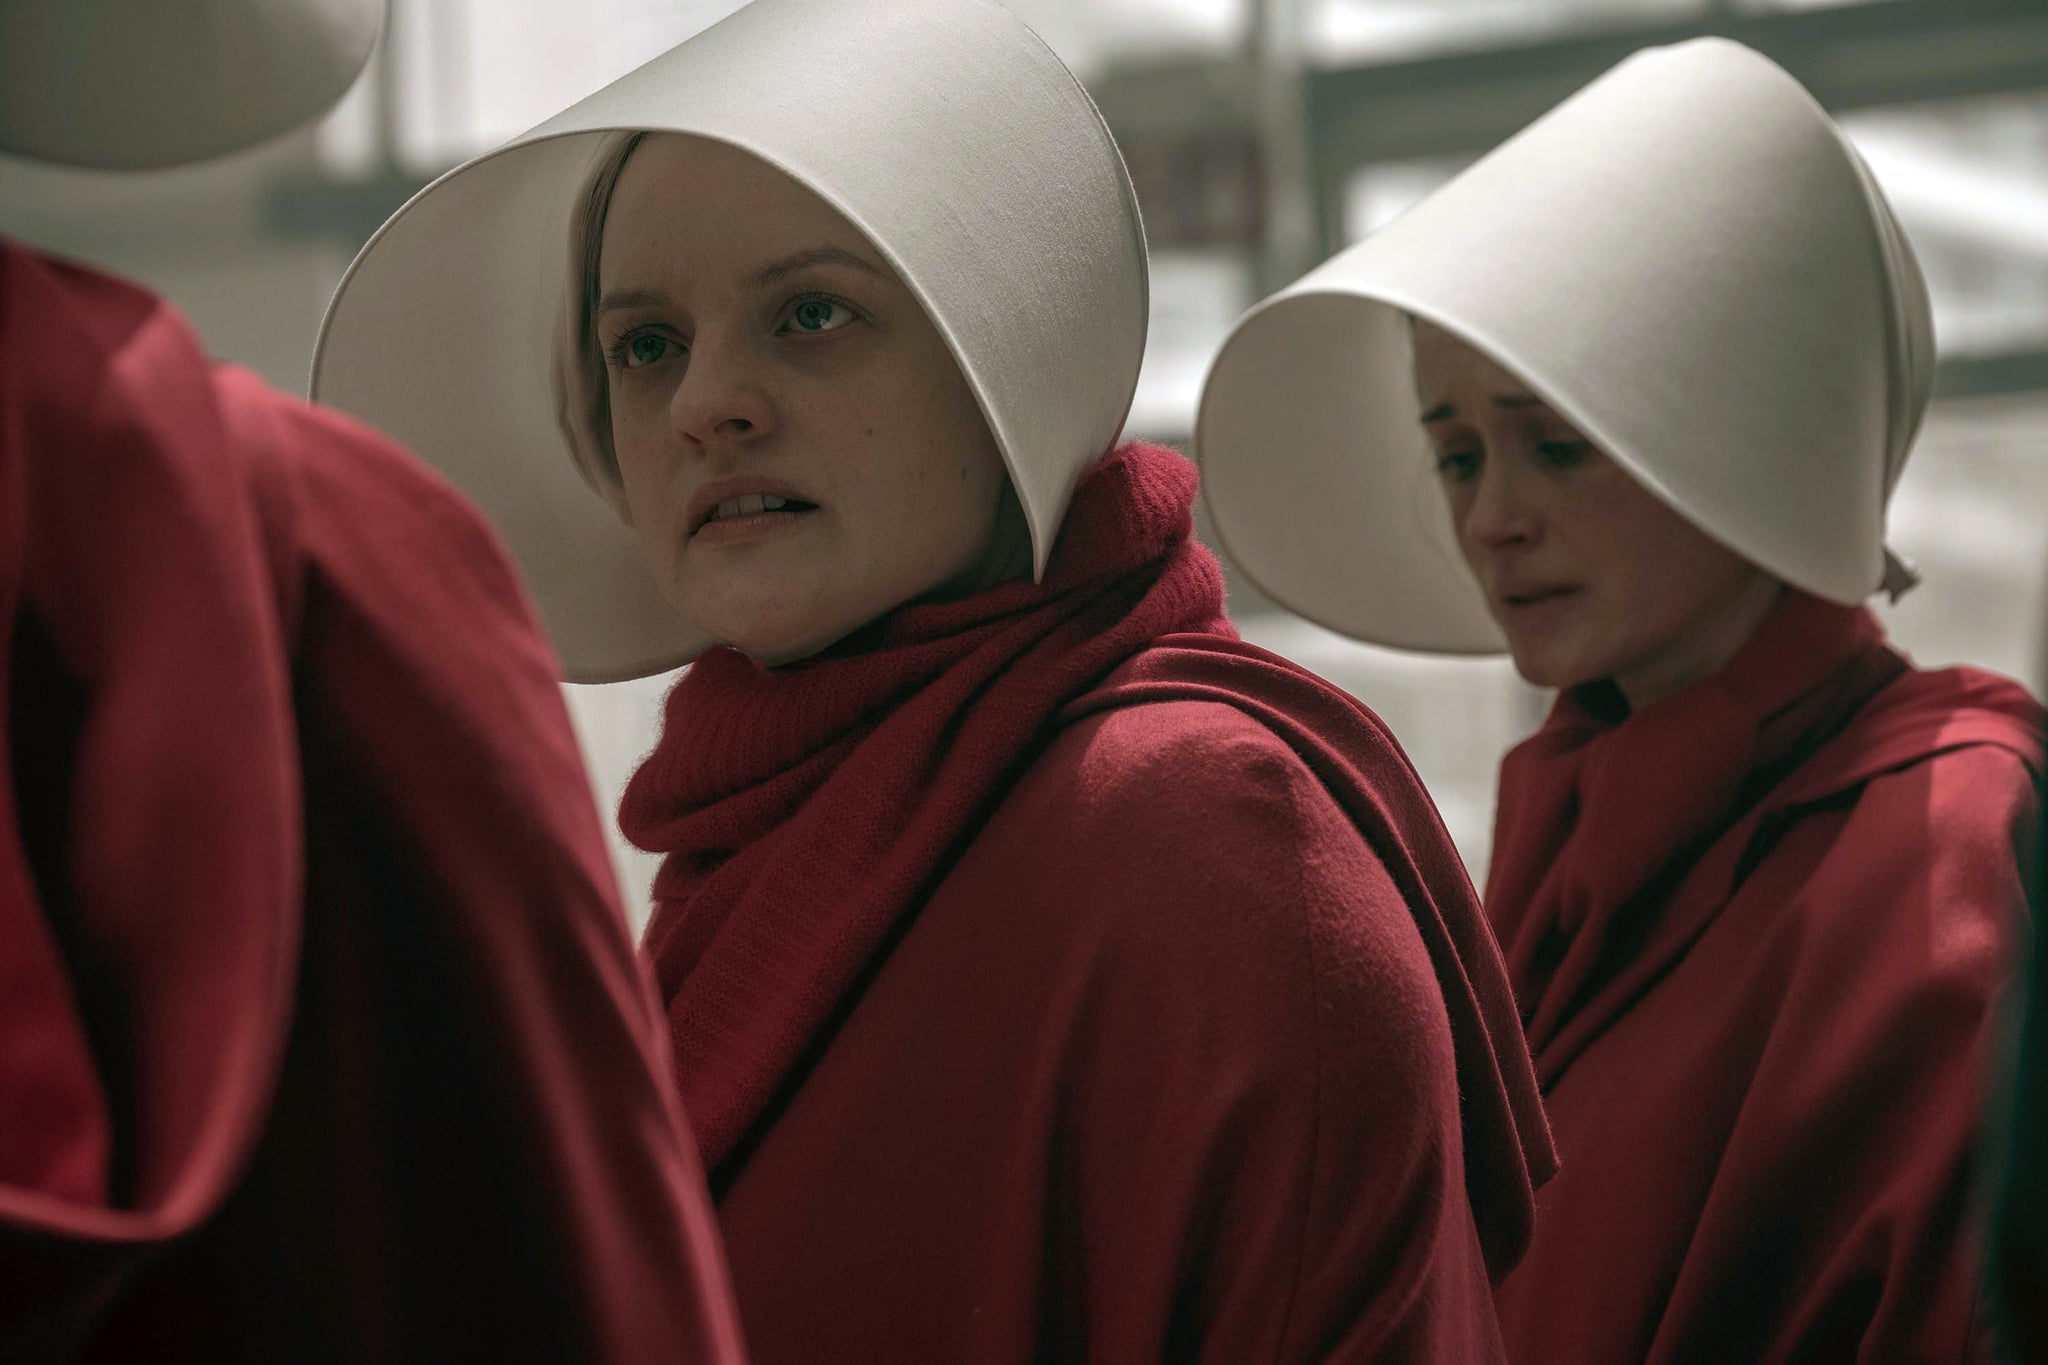 THE HANDMAID'S TALE, from left: Elisabeth Moss, Alexis Bledel, 'After', (Season 2, ep. 207, aired May 30, 2018). photo: Hulu / courtesy Everett Collection